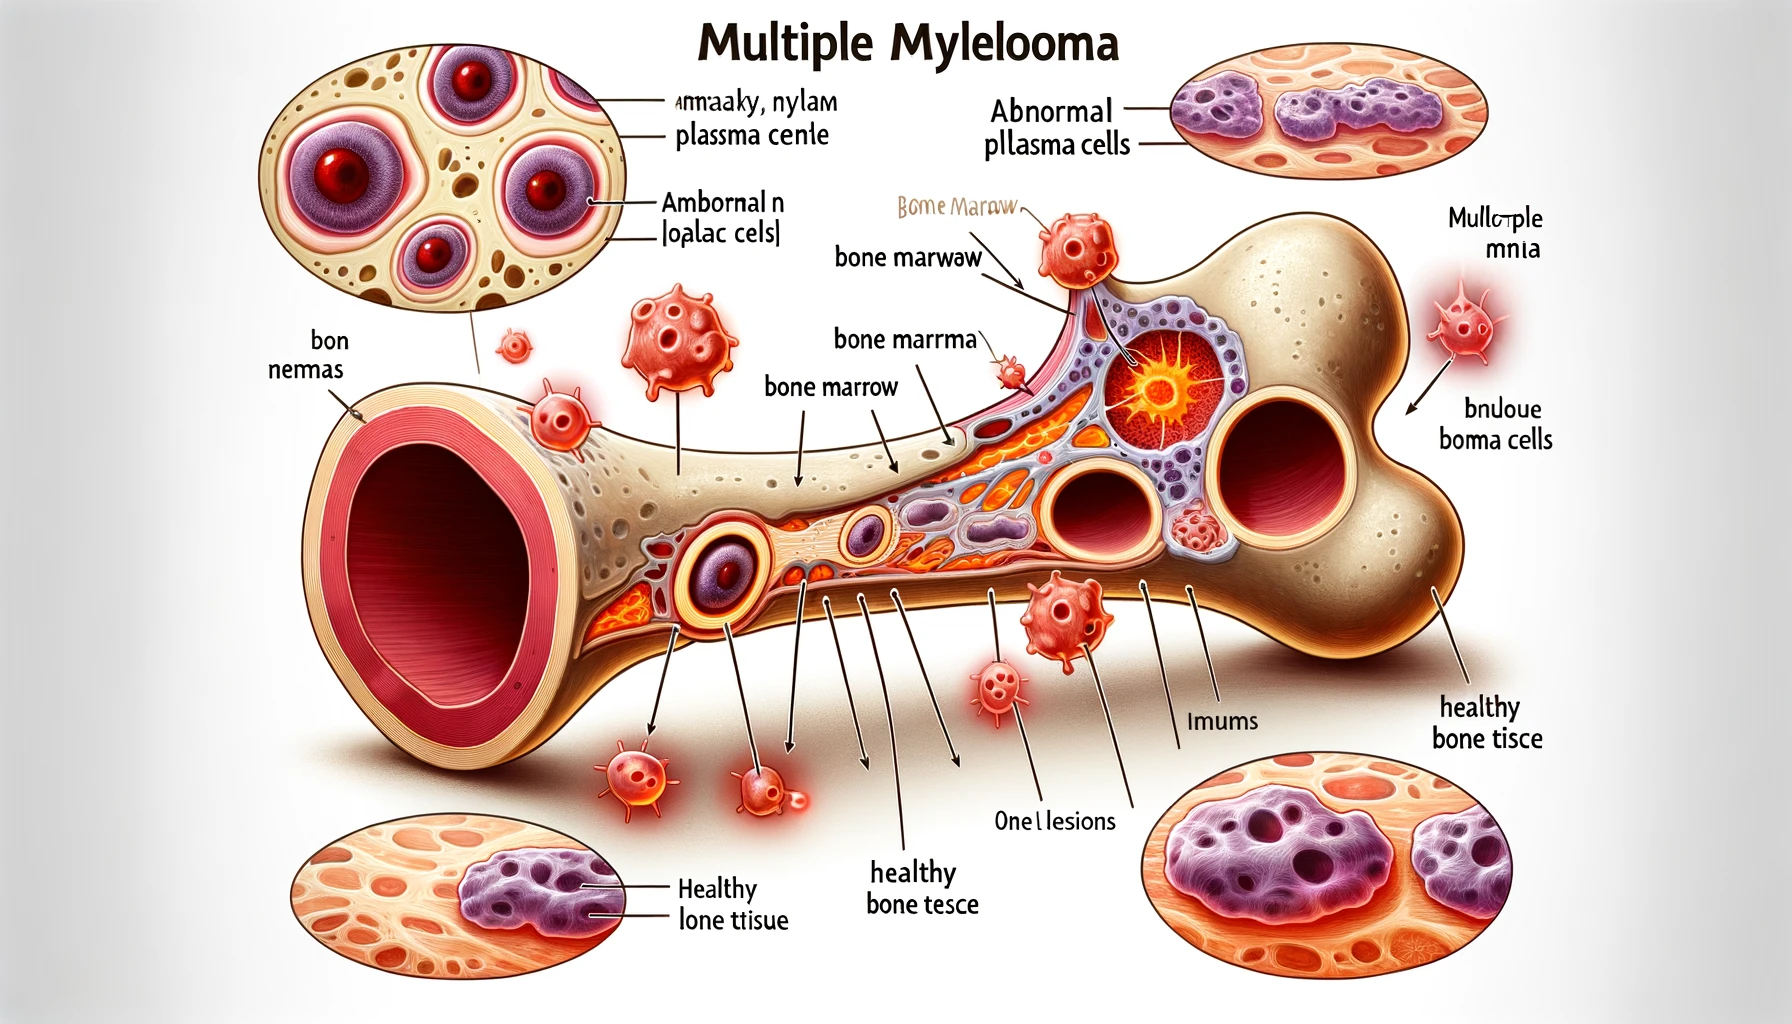 Multiple Myeloma: 5 Powerful Advances from the Research Foundation